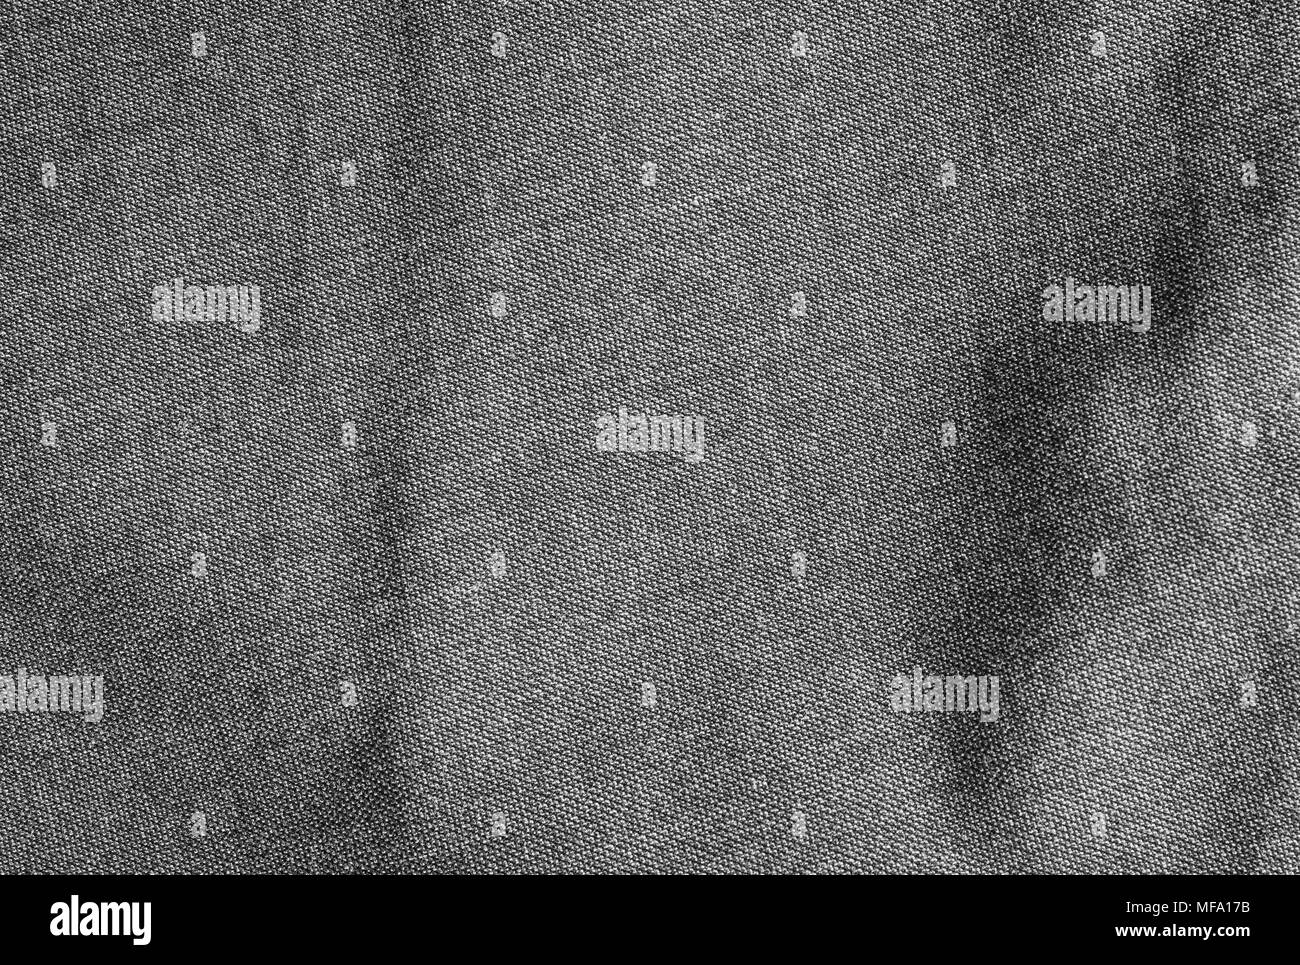 Dark grey fabric texture. Background with delicate striped pattern ...